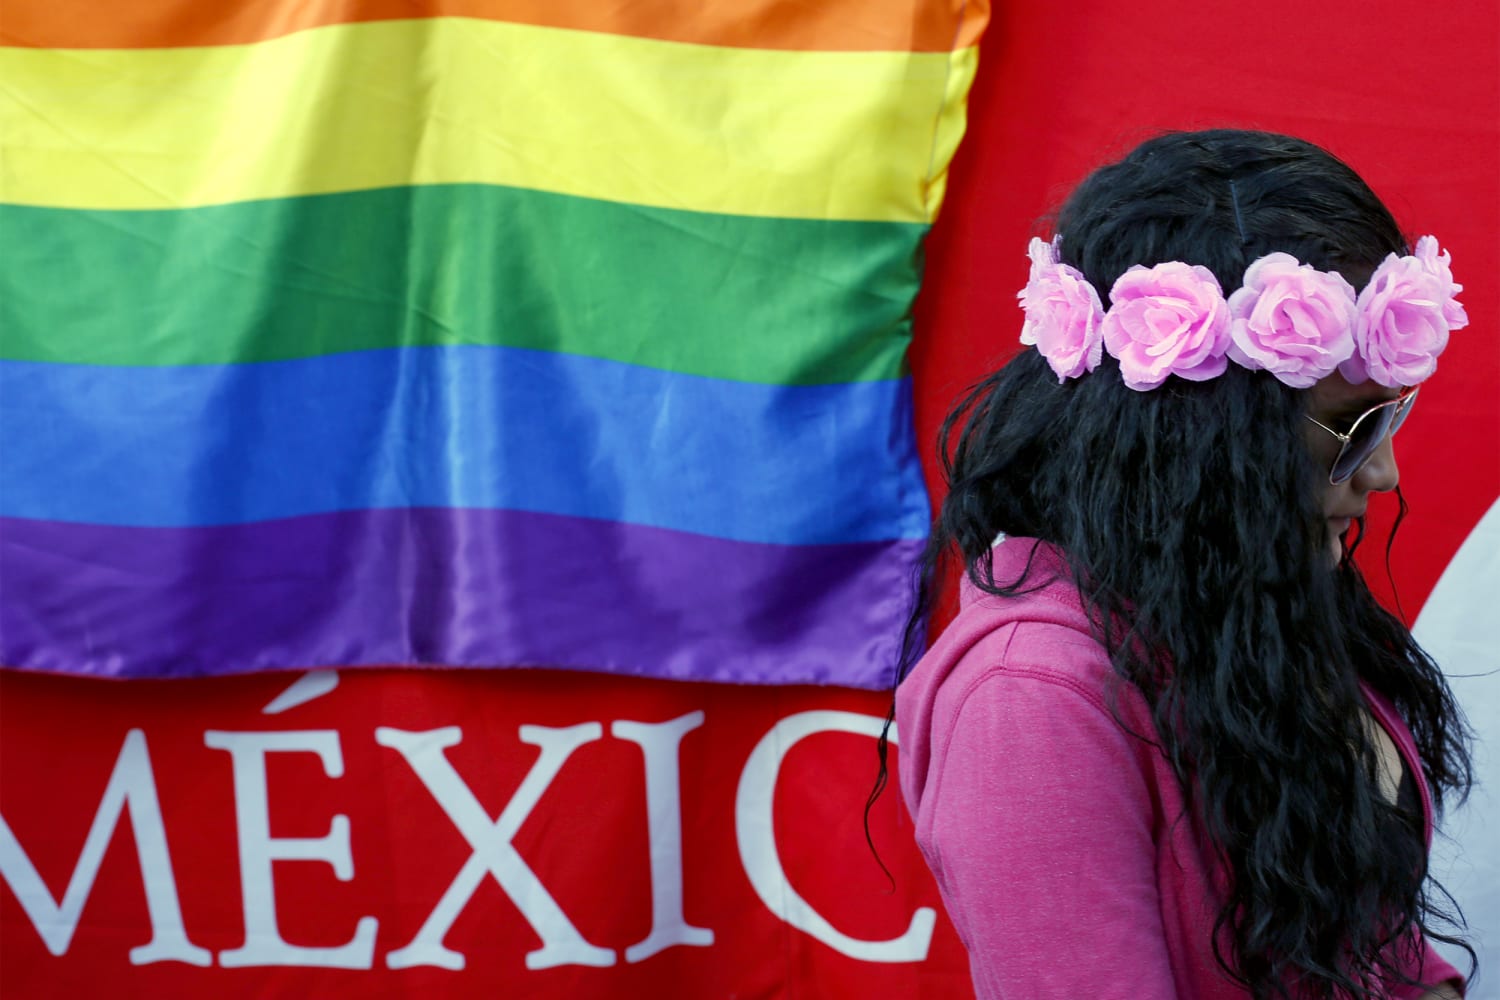 We are invisible': Discrimination, risks abound for Indigenous LGBTQ in  Mexico